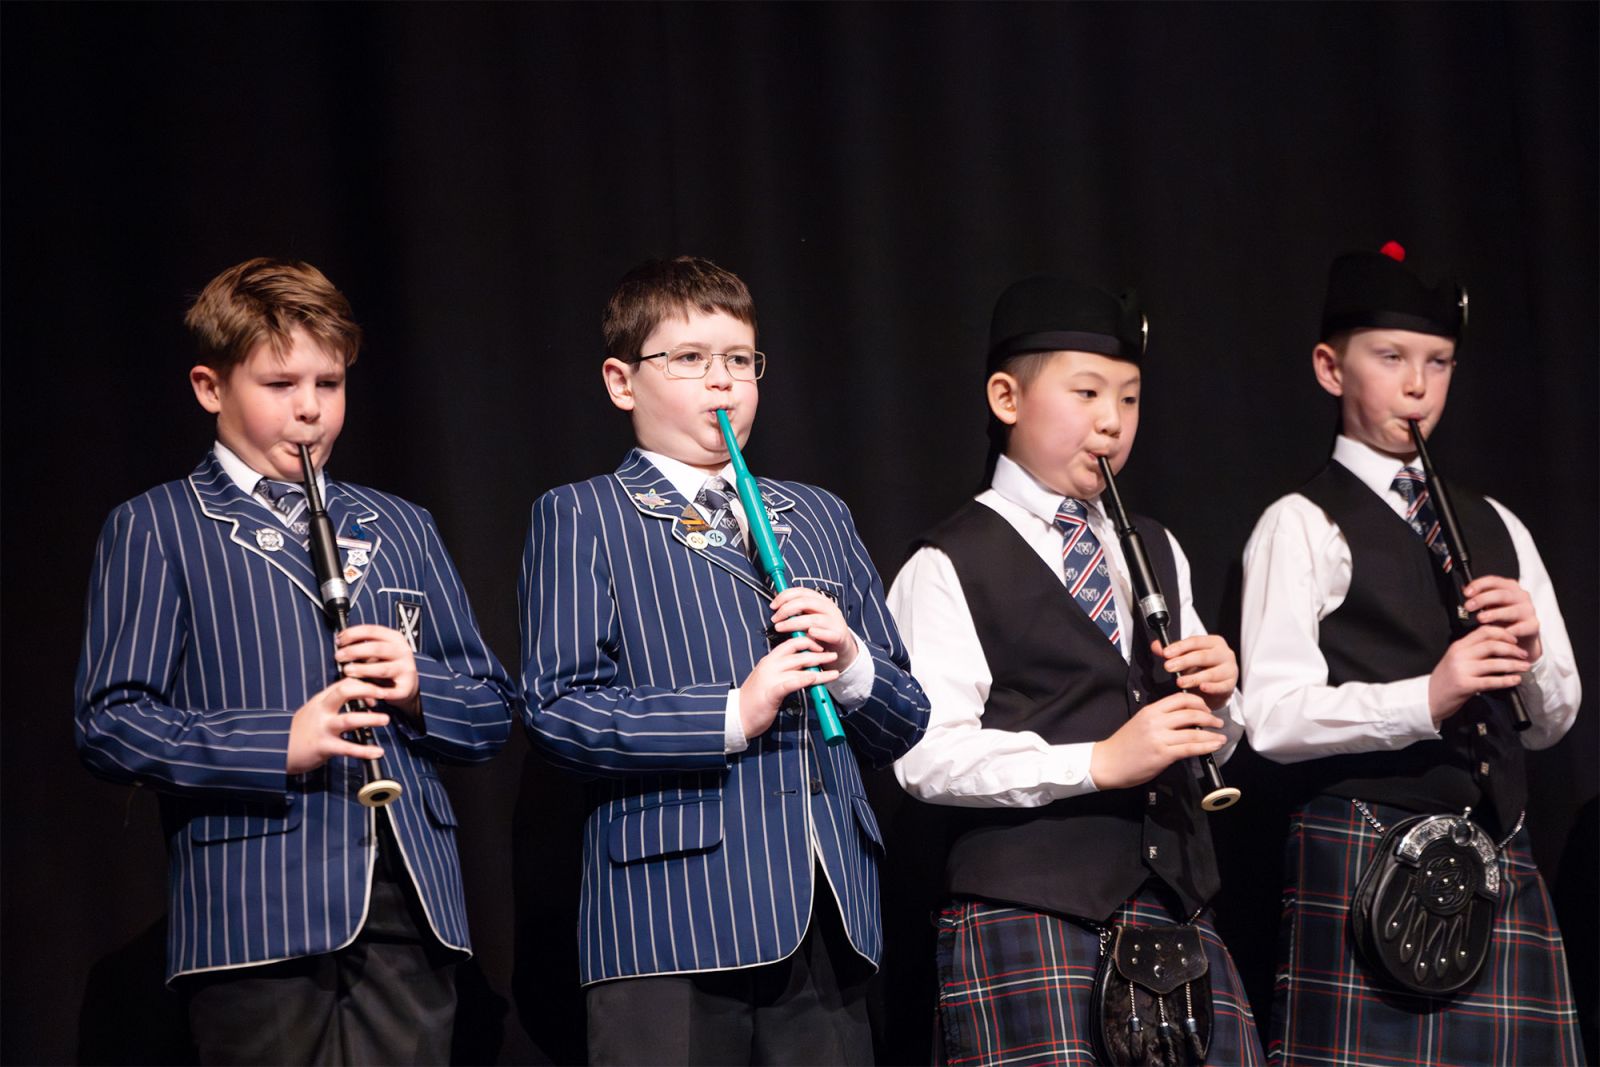 Preparatory student pipers performing at StAC Attack.